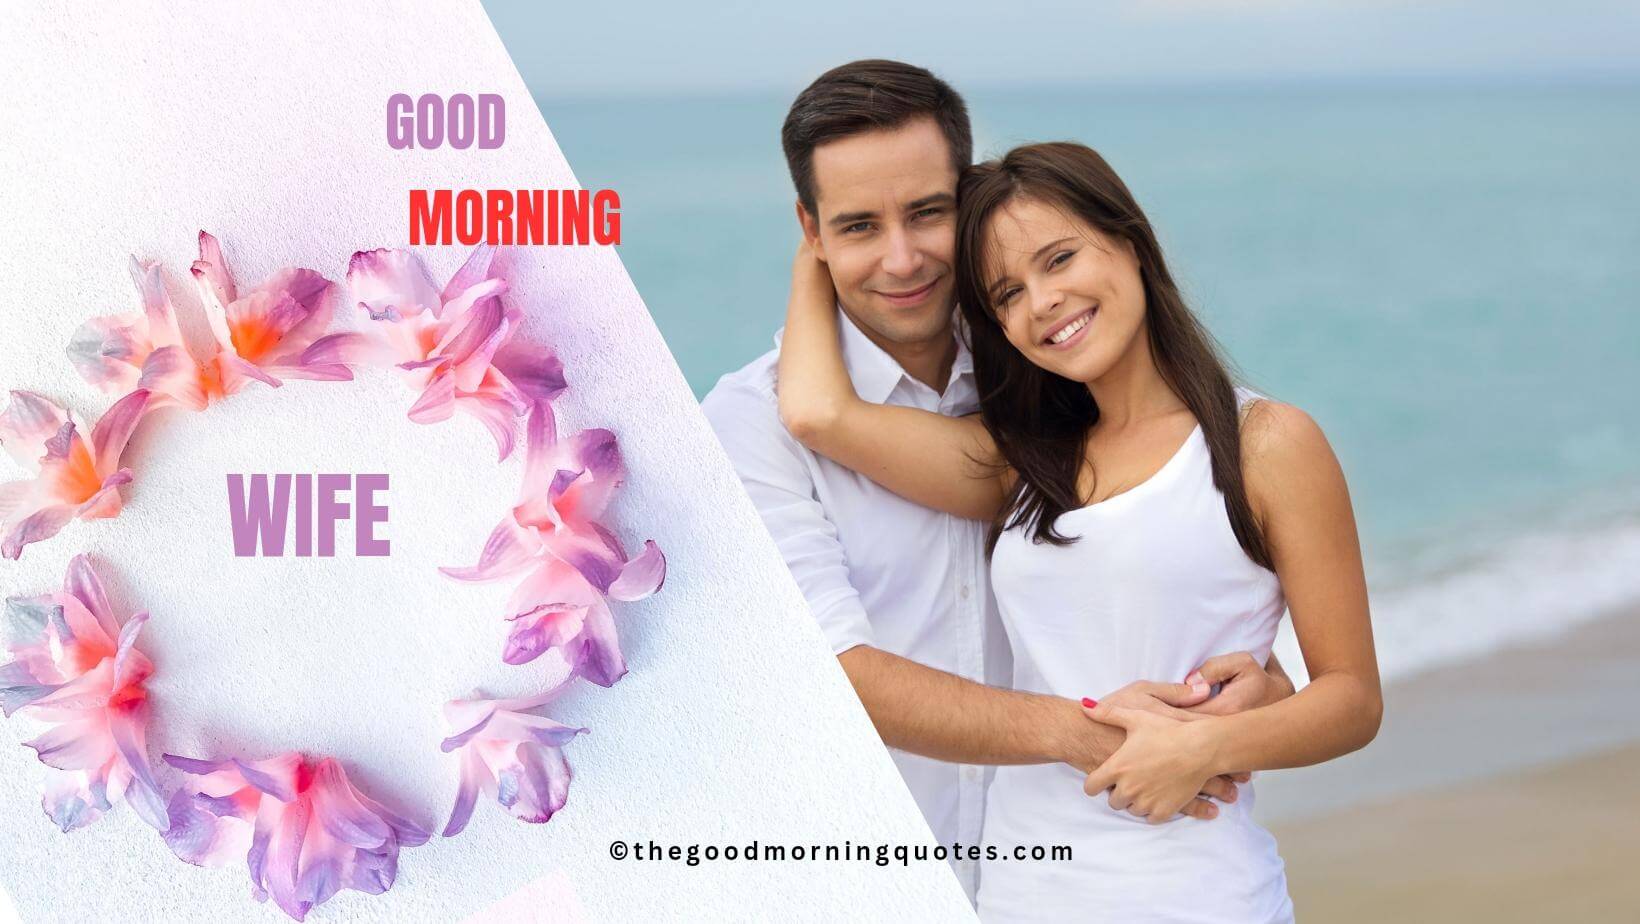 Good Morning Quotes for wife